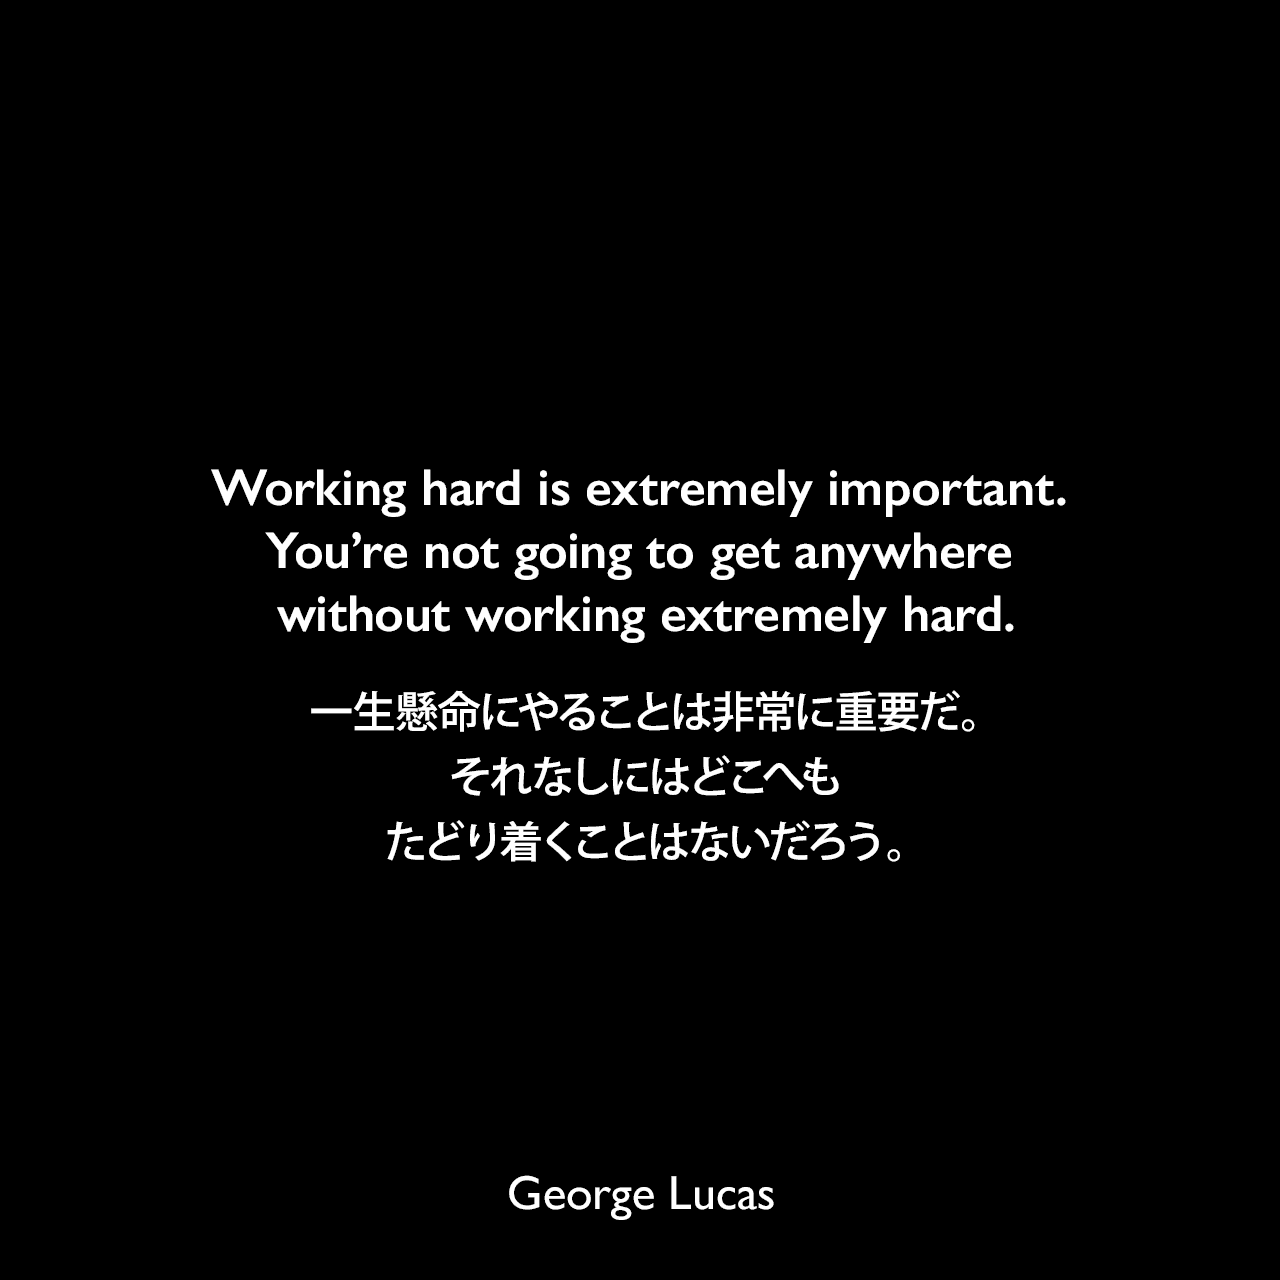 Working hard is extremely important. You’re not going to get anywhere without working extremely hard.一生懸命にやることは非常に重要だ。それなしにはどこへもたどり着くことはないだろう。George Lucas